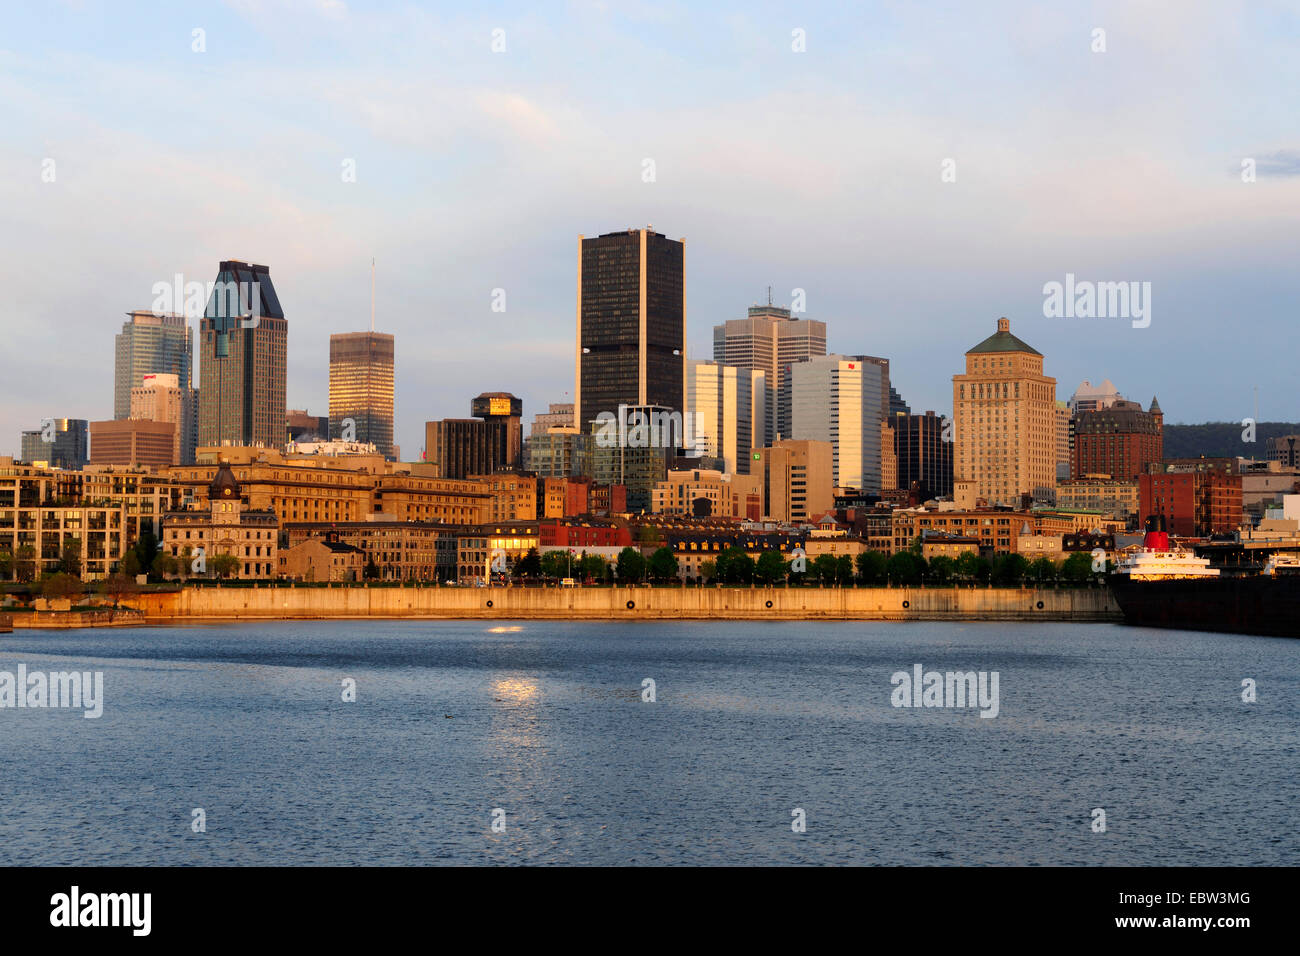 Skyline of Montreal at Saint Lawrence River with historical old city an harbour, Canada, Quebec, Montreal Stock Photo